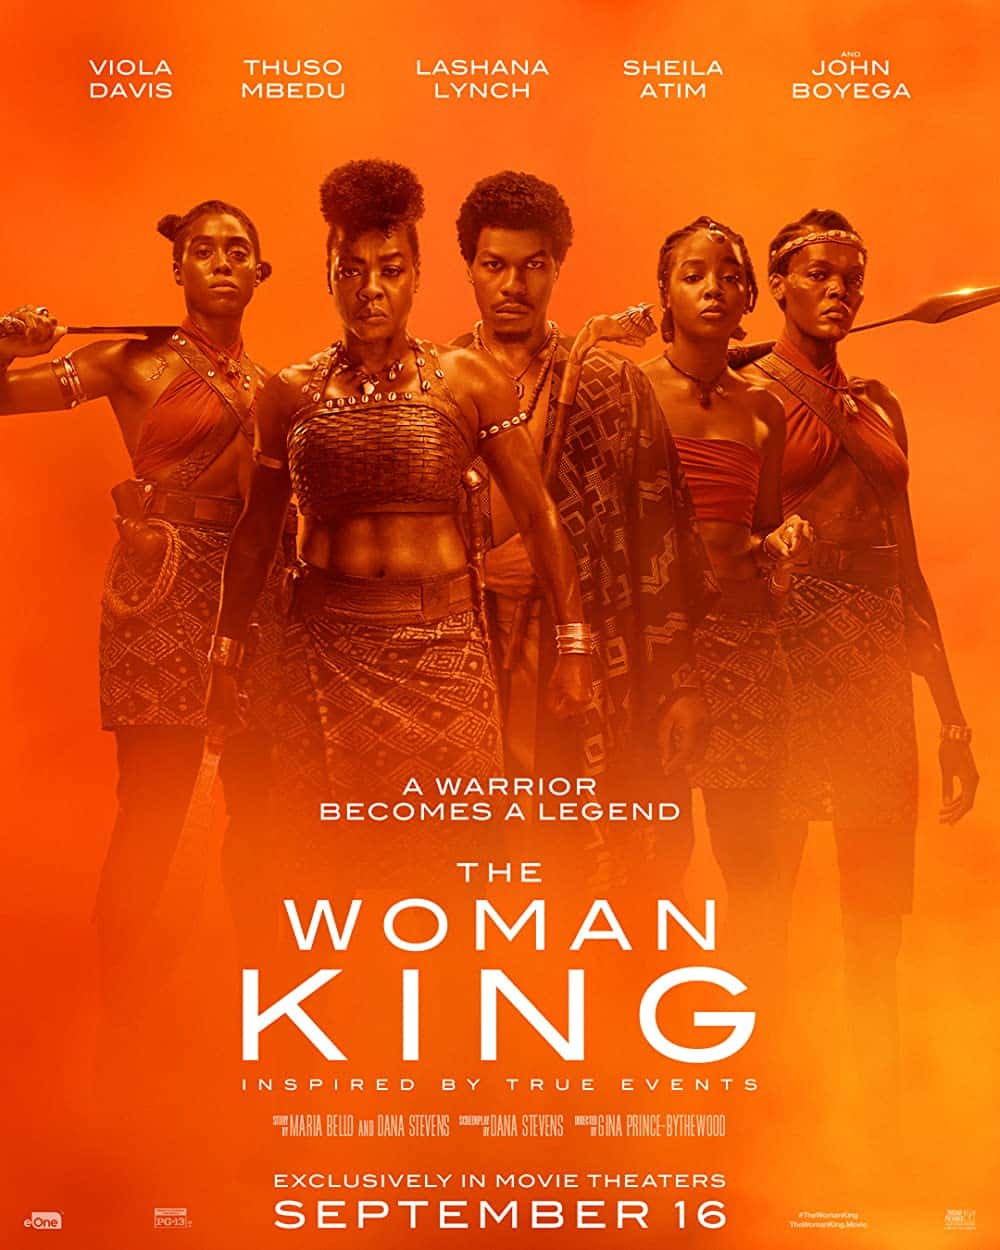 The Woman King film poster